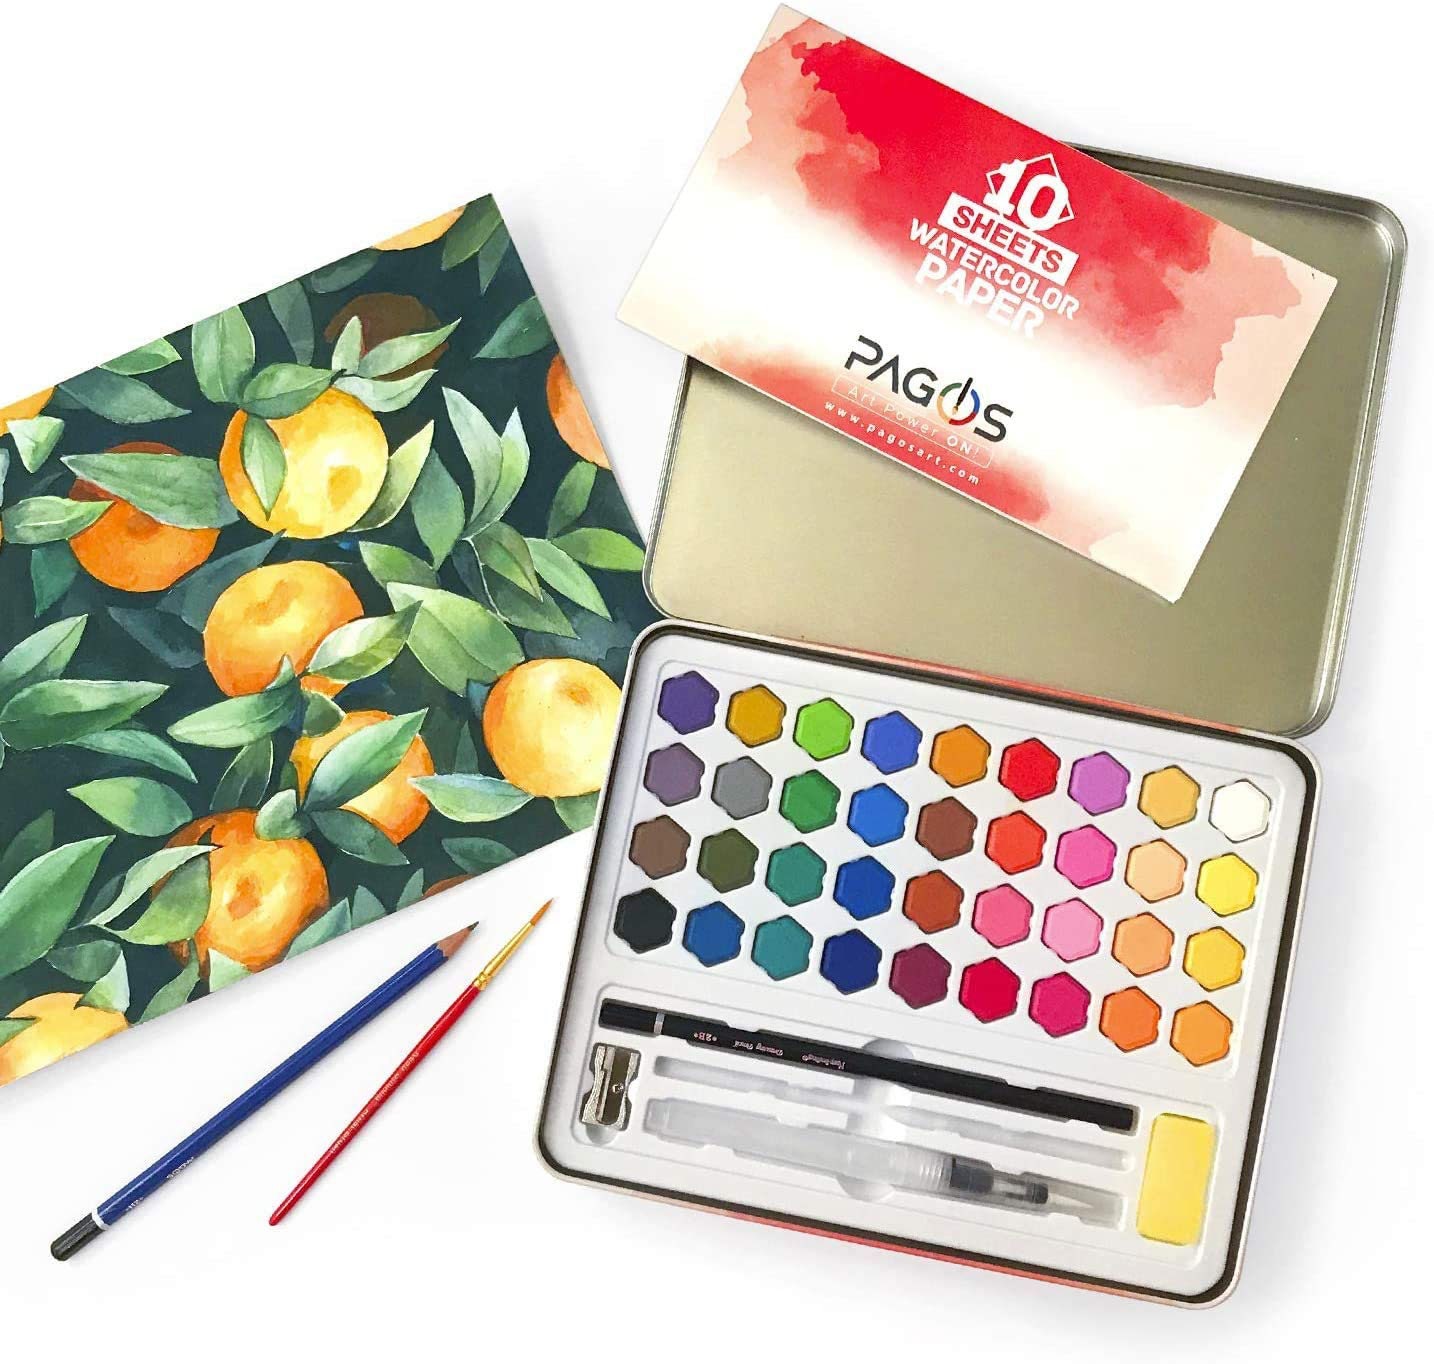 Shuttle Art Watercolor Paint Set, 48 Colors Watercolor Paint Pan Set with 3 Paint Brushes for Beginners, Artists, Kids & Adults to Watercolor Paint, B